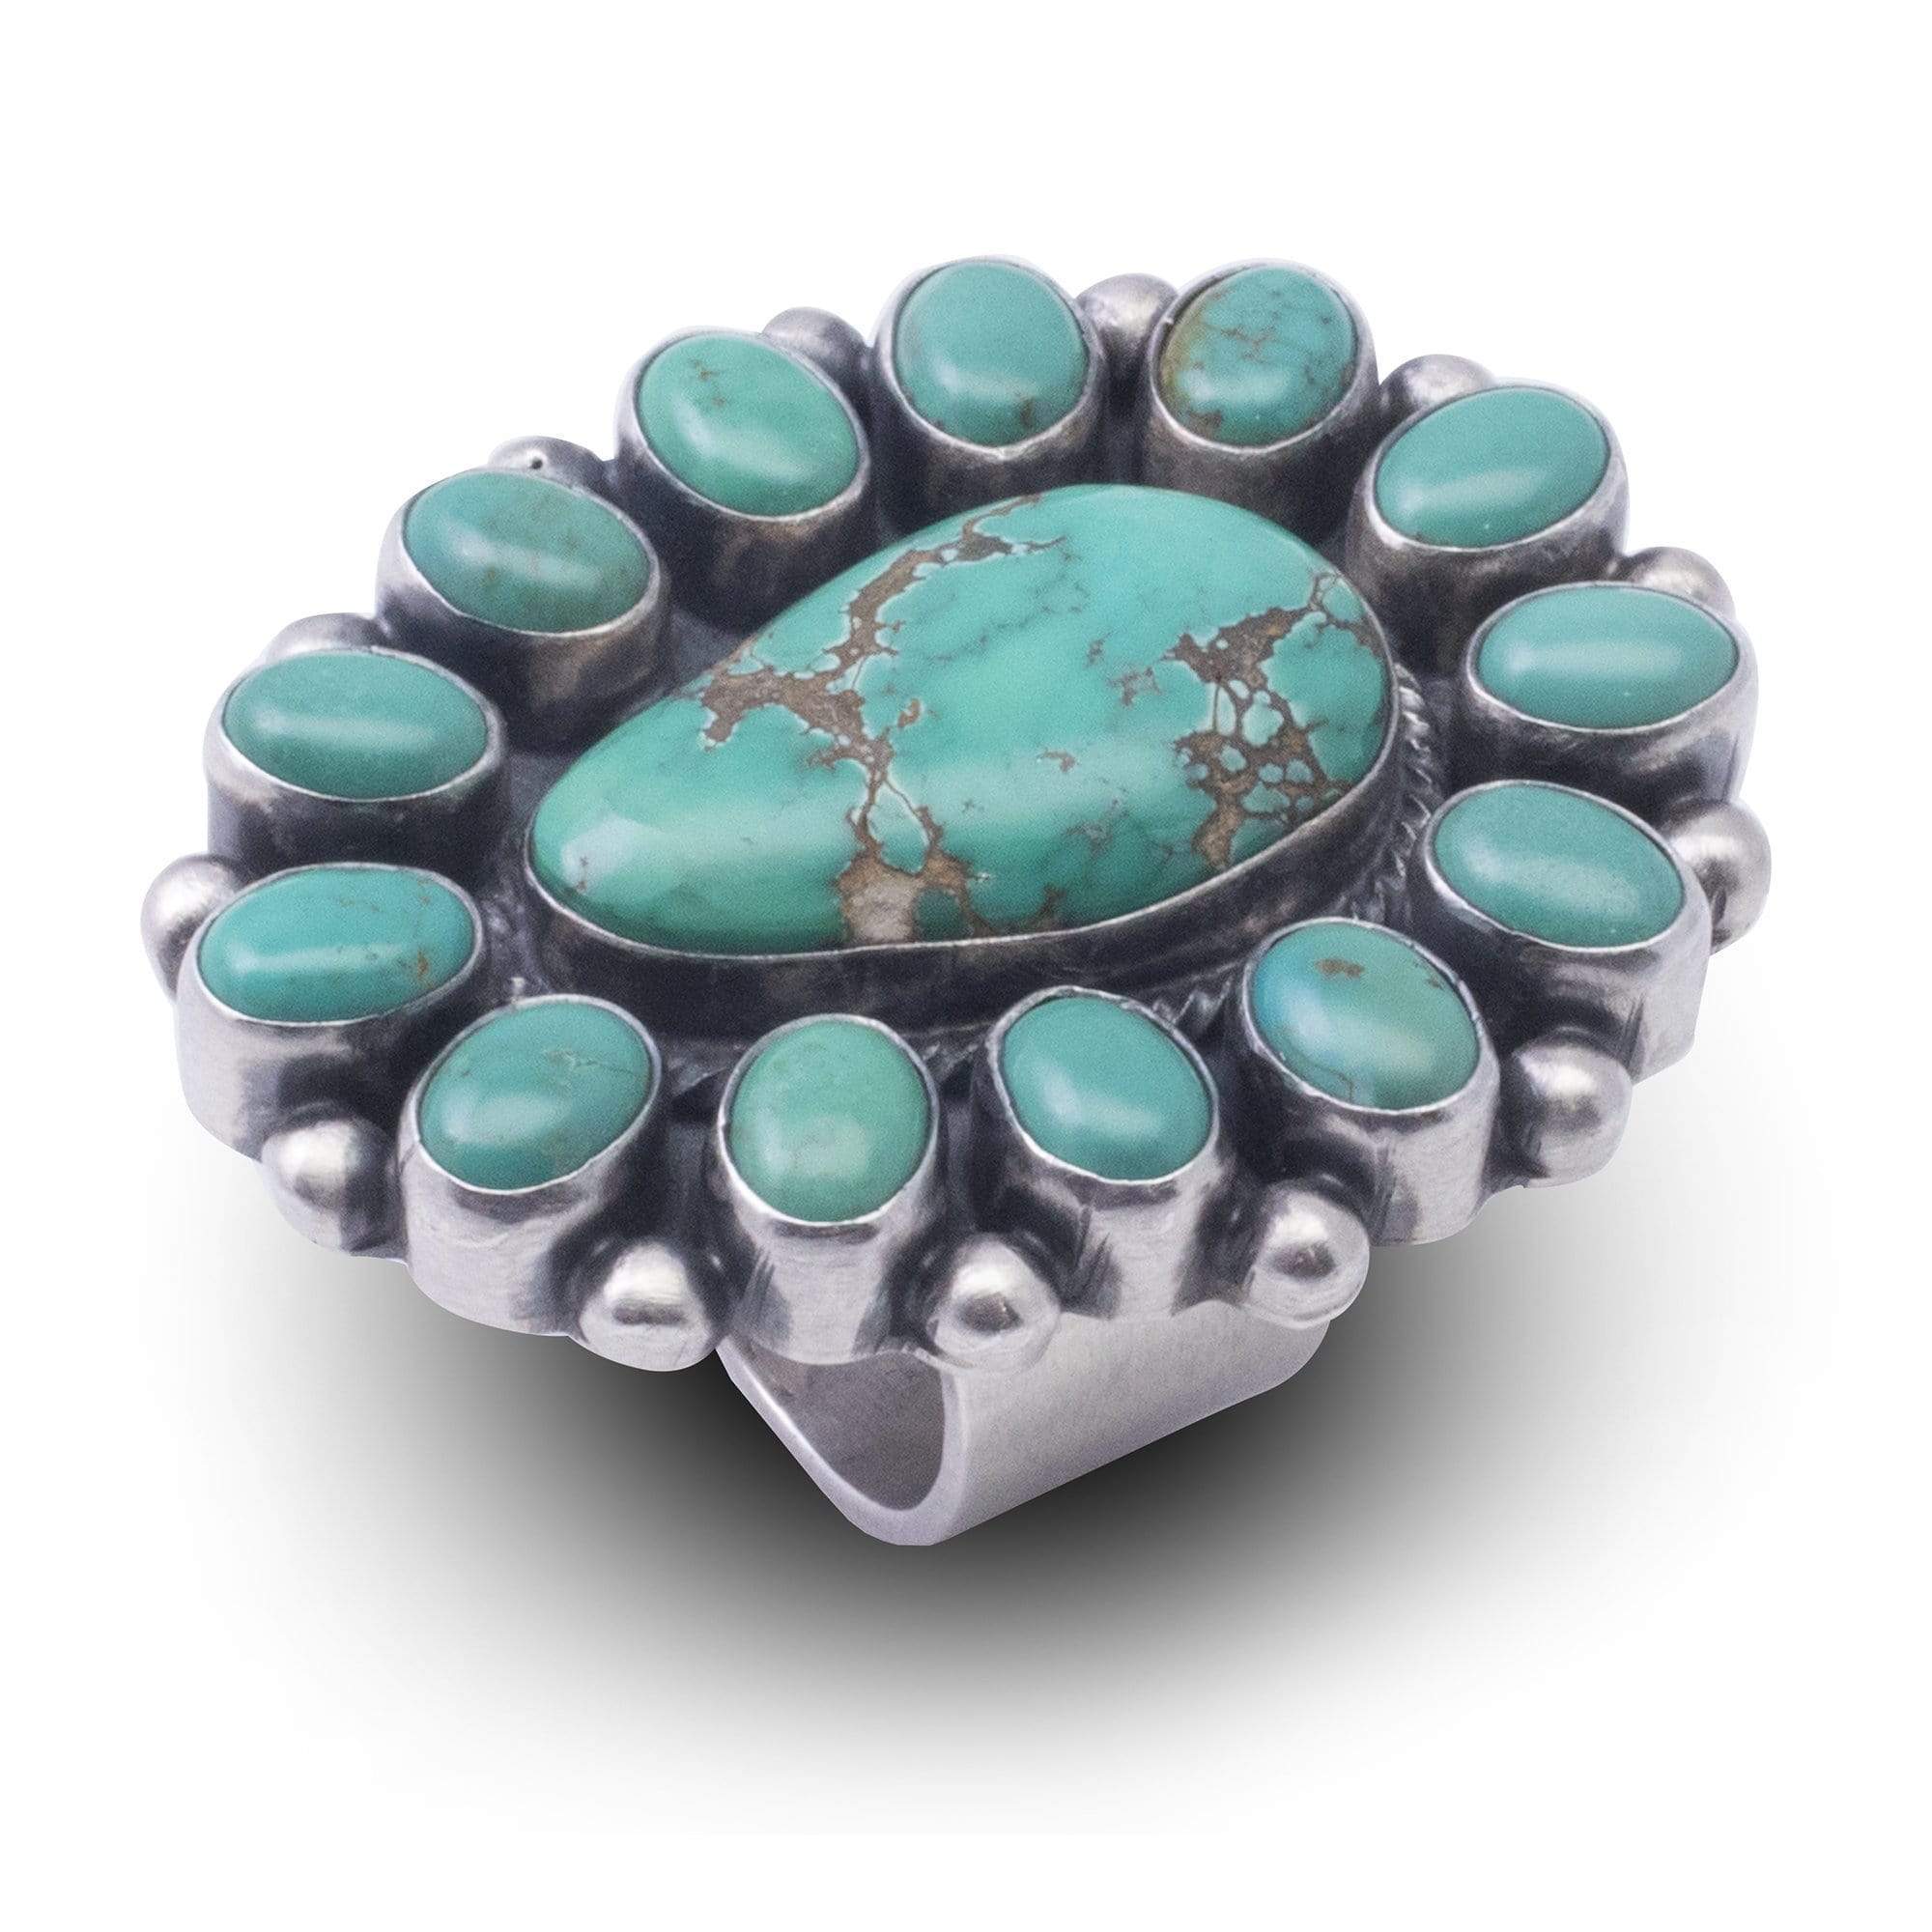 Kalifano Native American Jewelry 9 Bobby Johnson Carico Lake Turquoise USA Native American Made 925 Sterling Silver Ring NAR2400.001.9